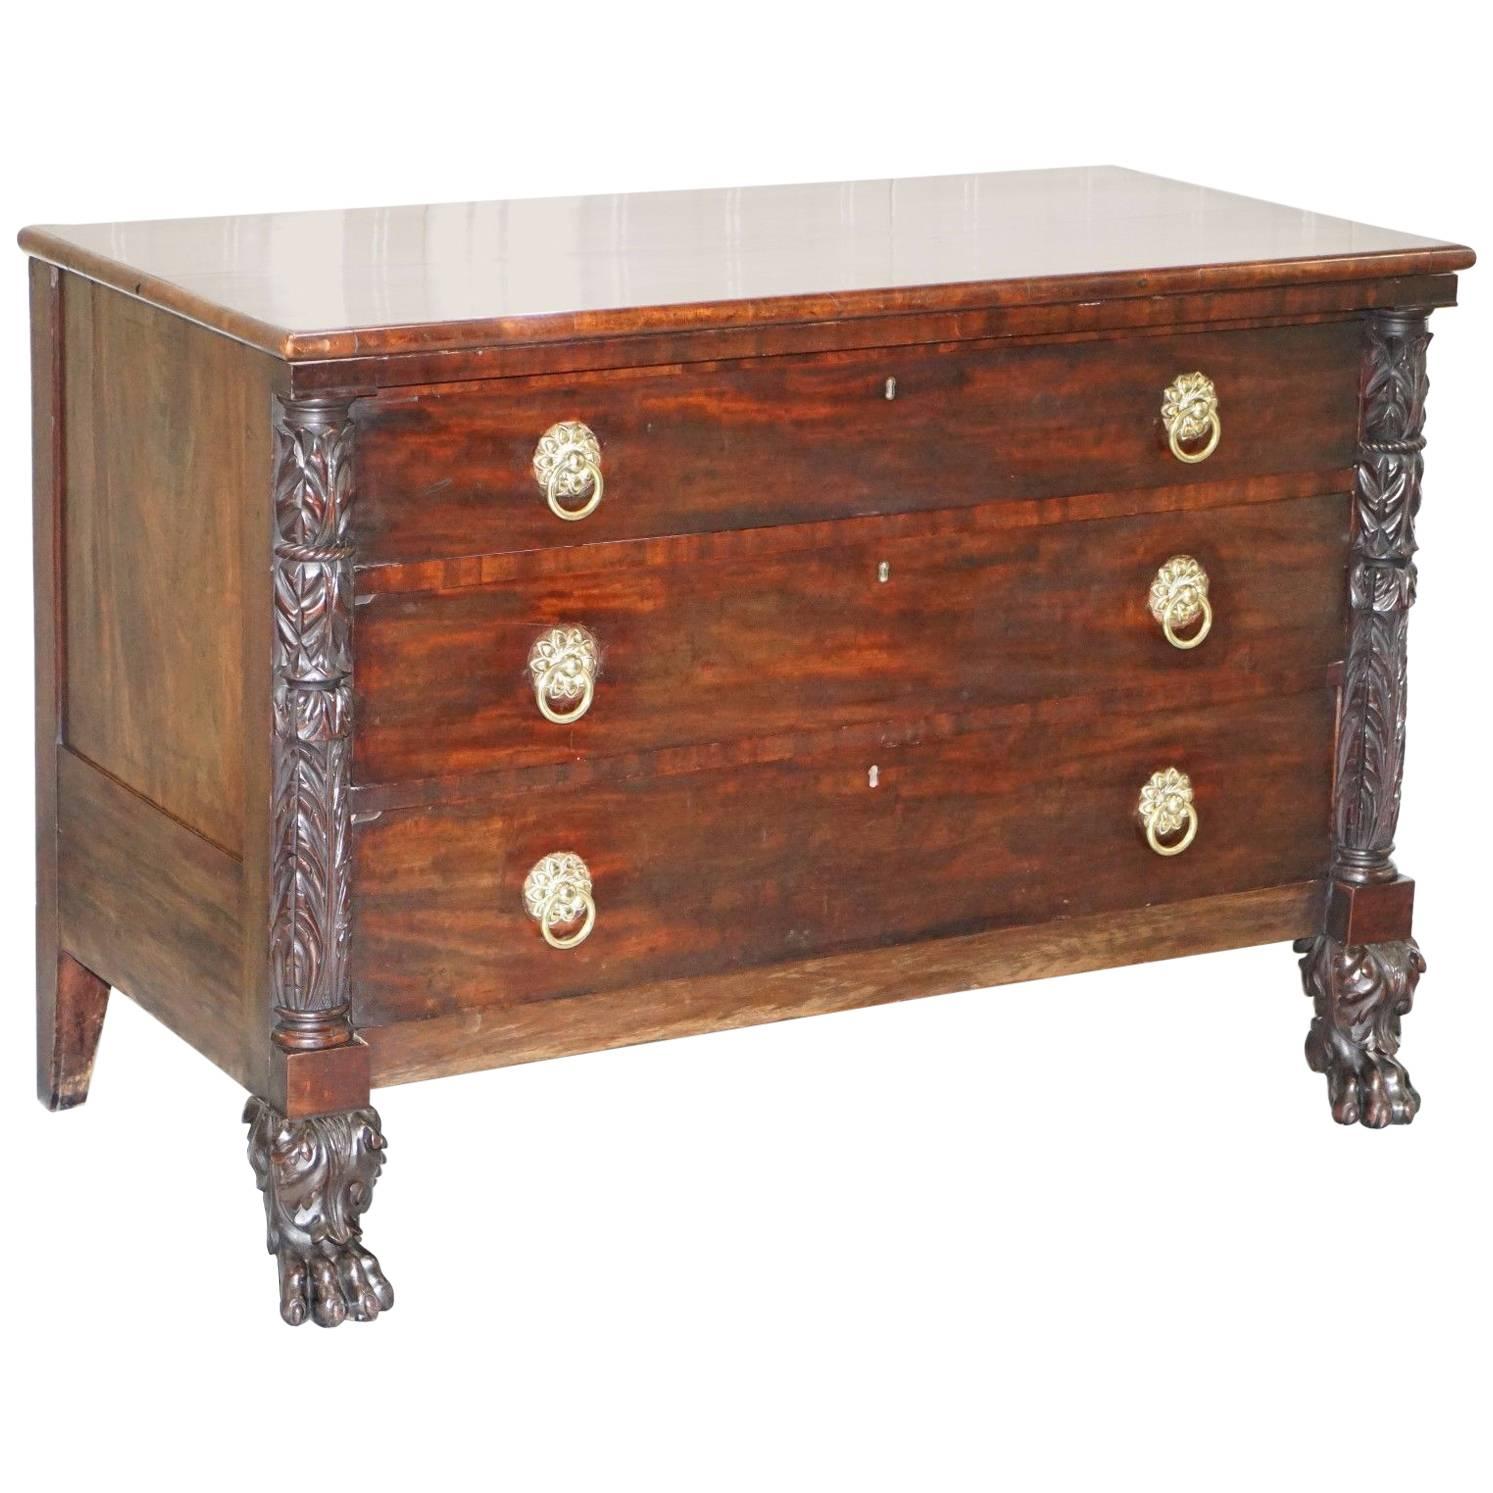 Lion Hairy Paw Carved American Federal Philadelphia Chest of Drawers, 1825